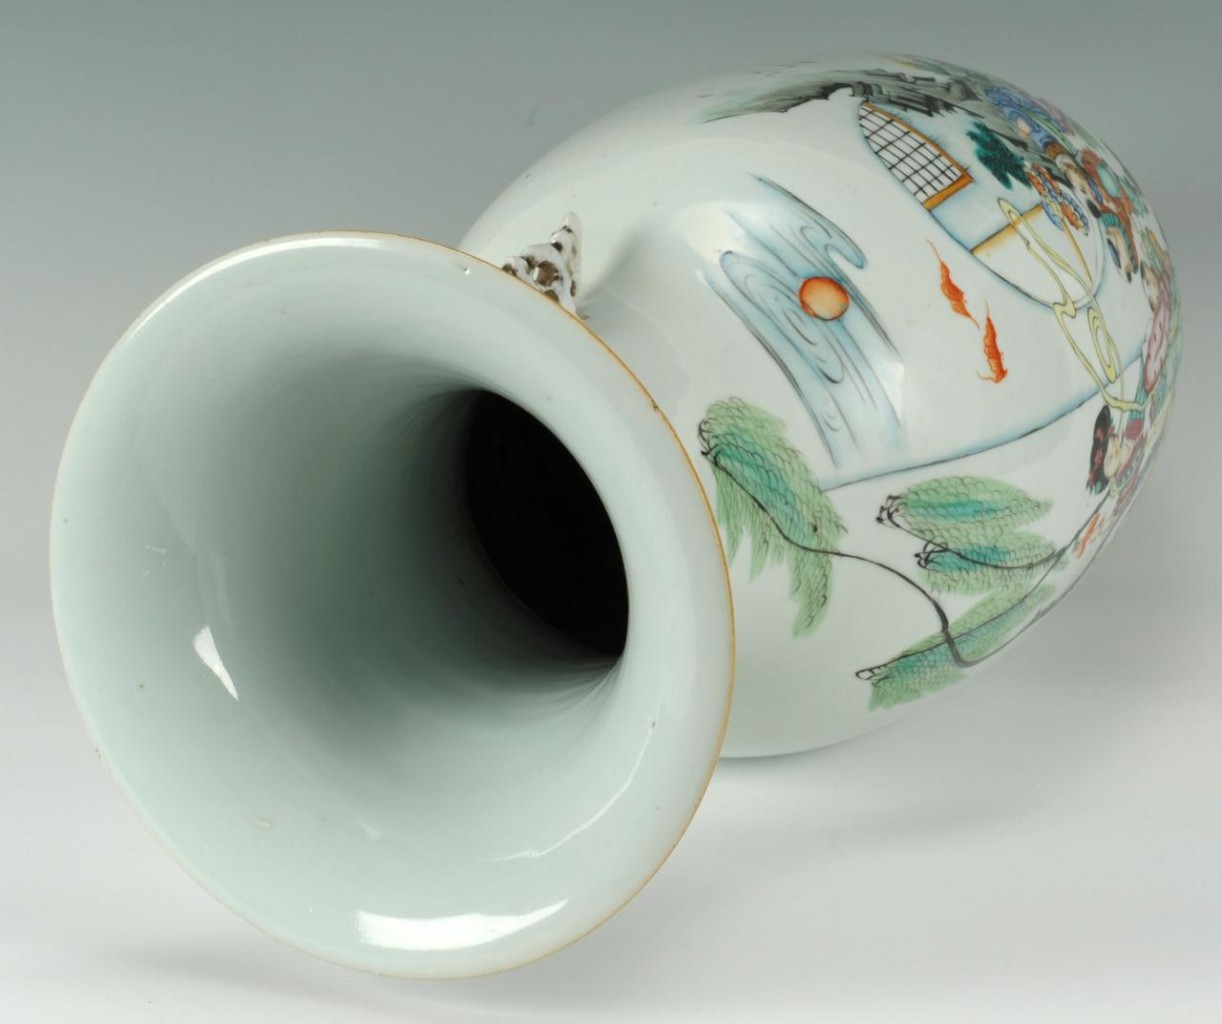 Lot 405: Chinese Porcelain Temple Vase and Porcelain Plate